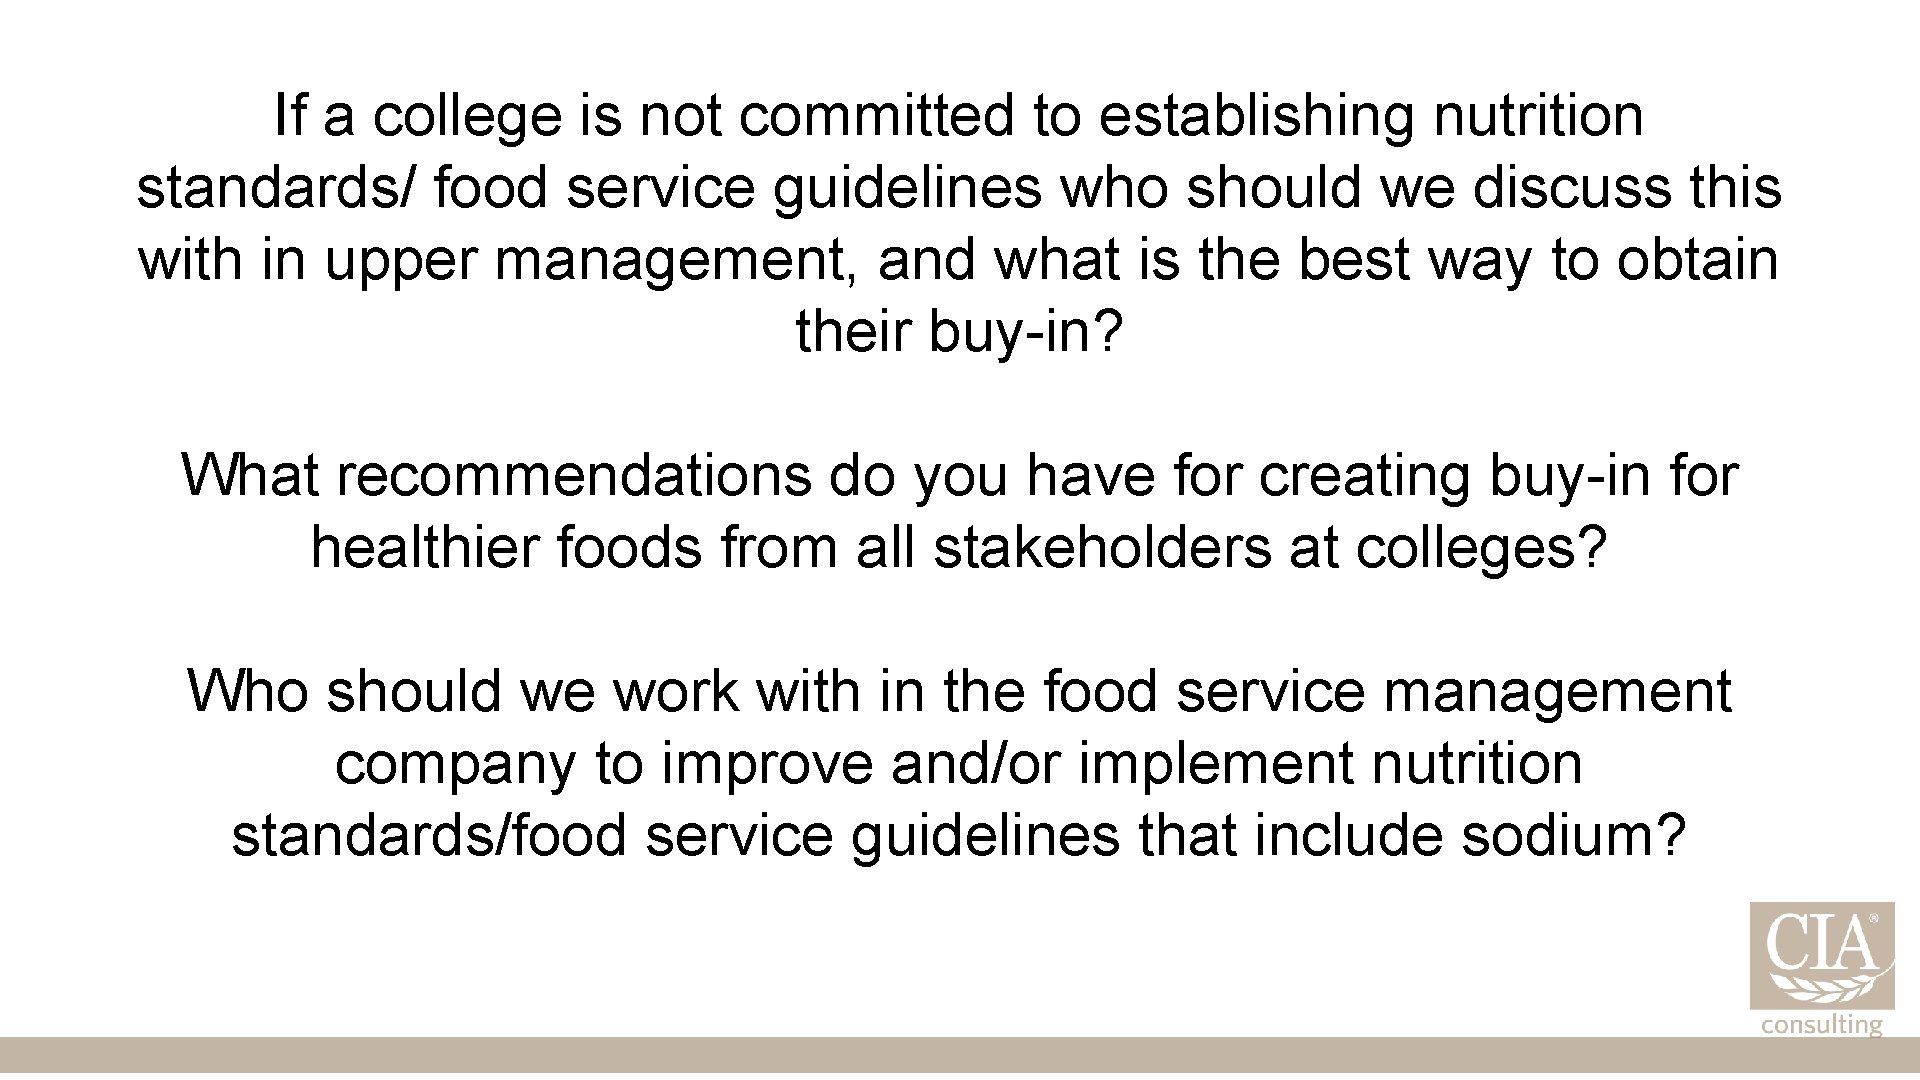 If a college is not committed to establishing nutrition standards/ food service guidelines who